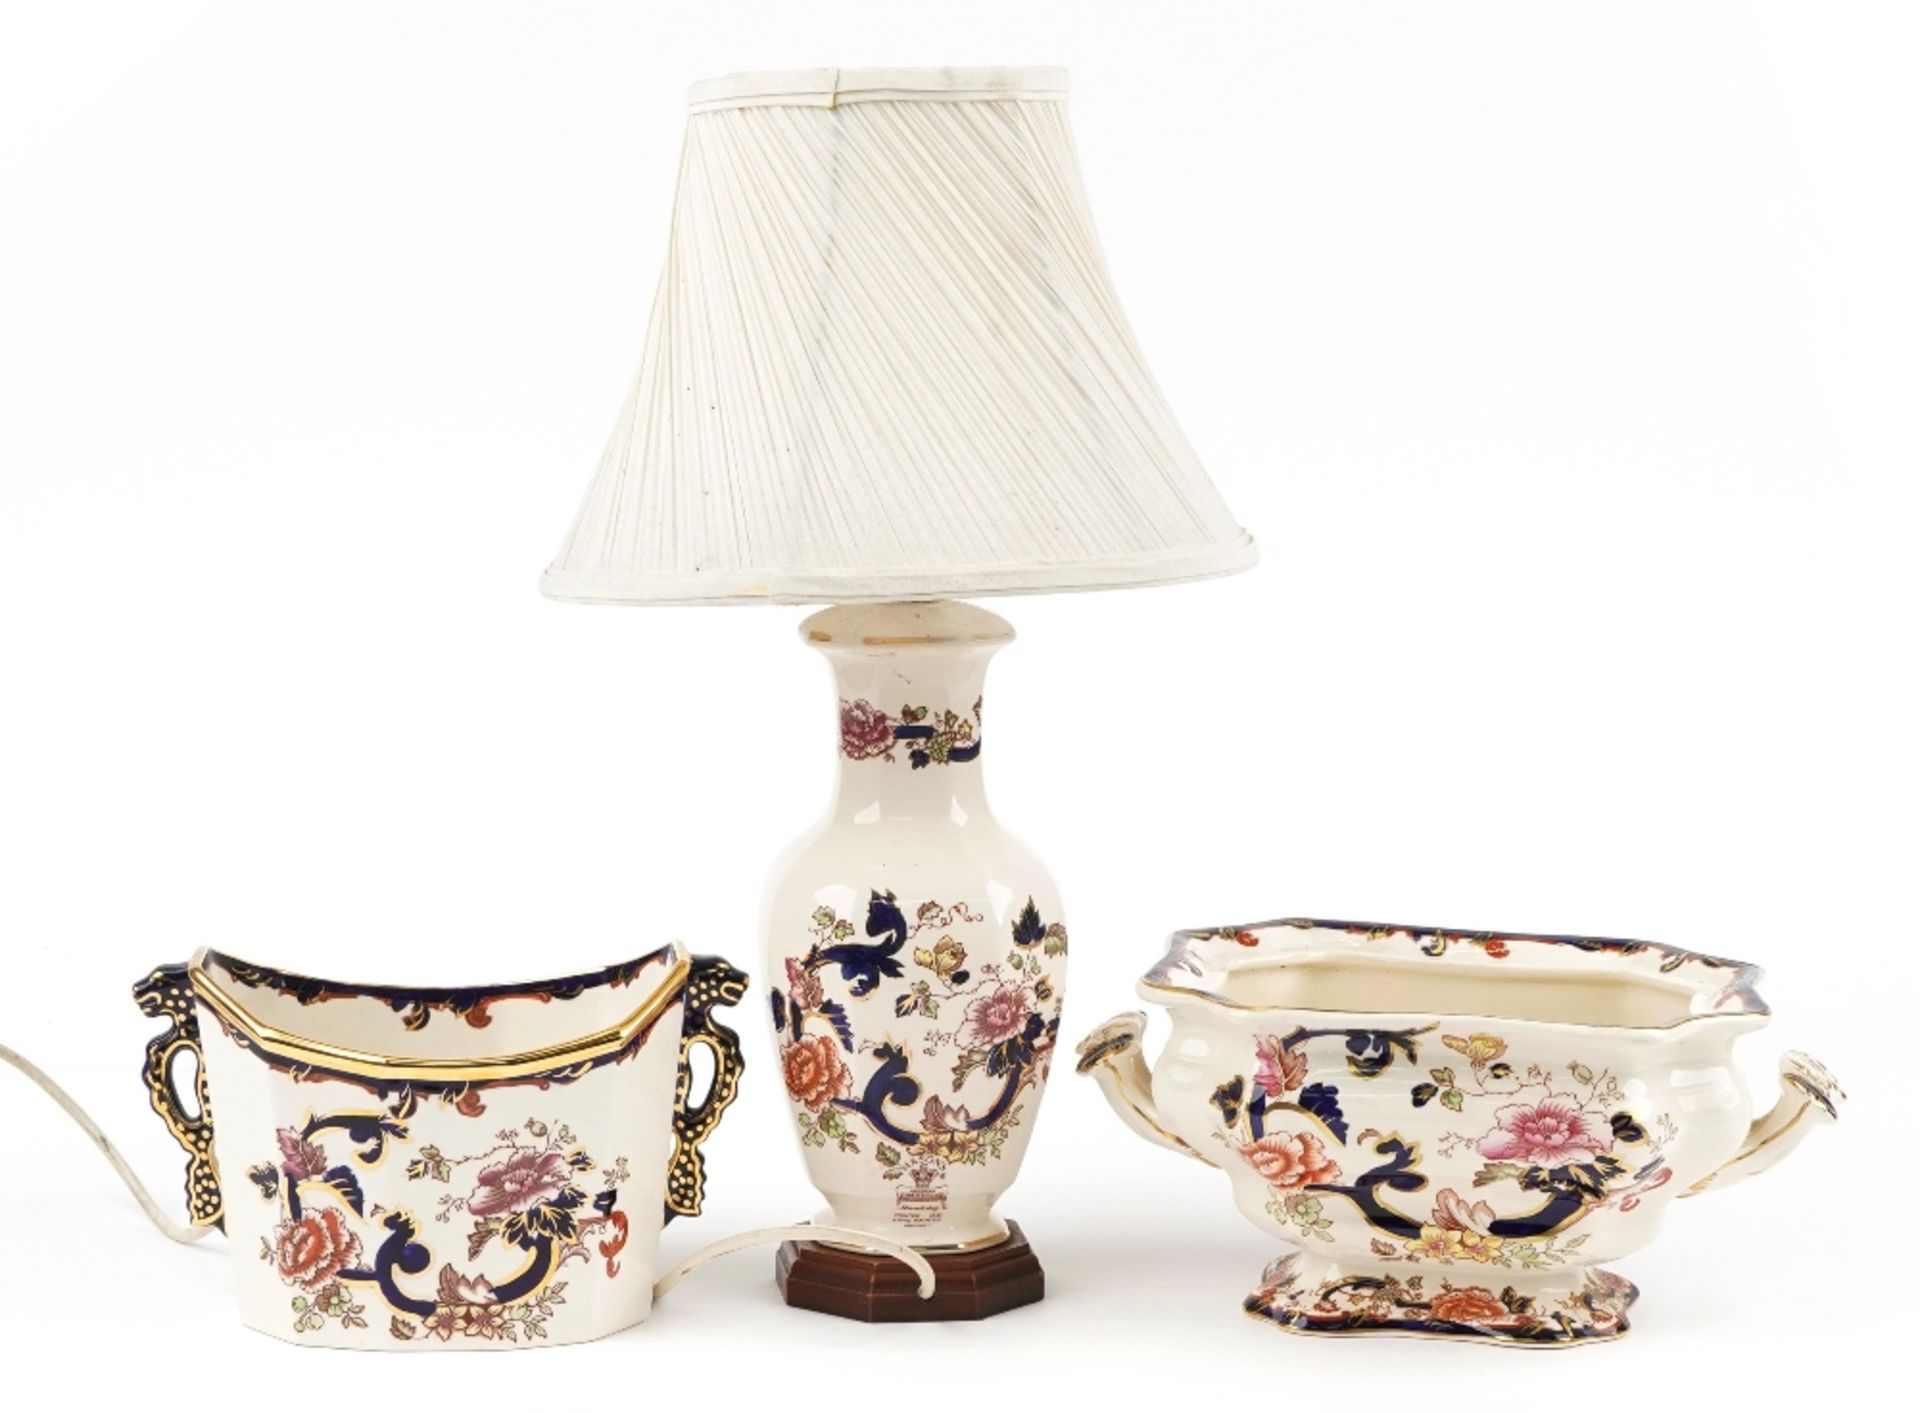 Mason's Mandalay comprising a vase lamp with silk lined shade, tureen and planter with twin handles, - Image 2 of 4